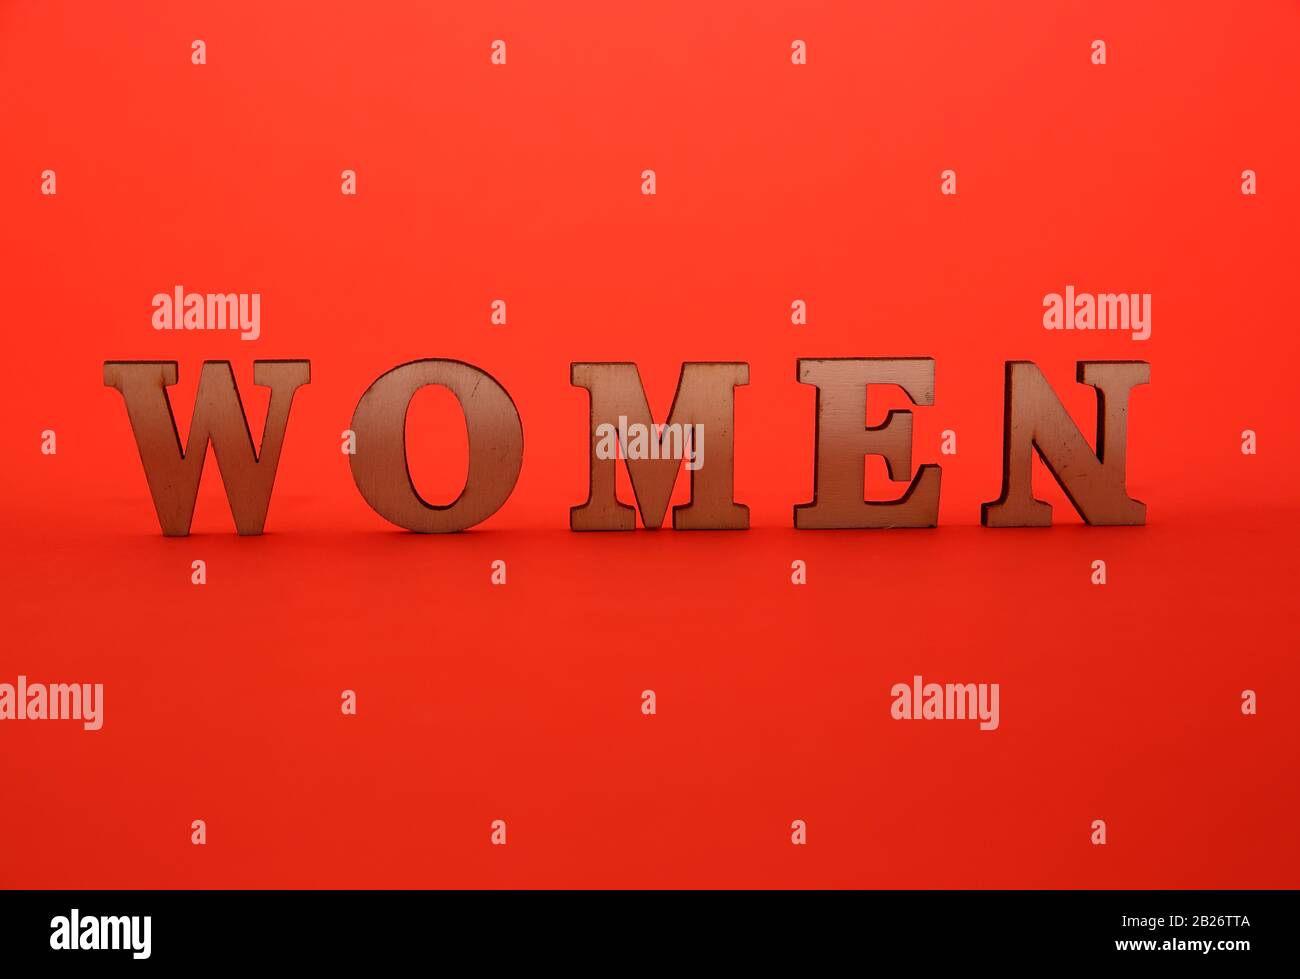 Word WOMEN made of decorative wooden letetrs standing in middle of intensive red color background, International Women's Day concept. Stock Photo